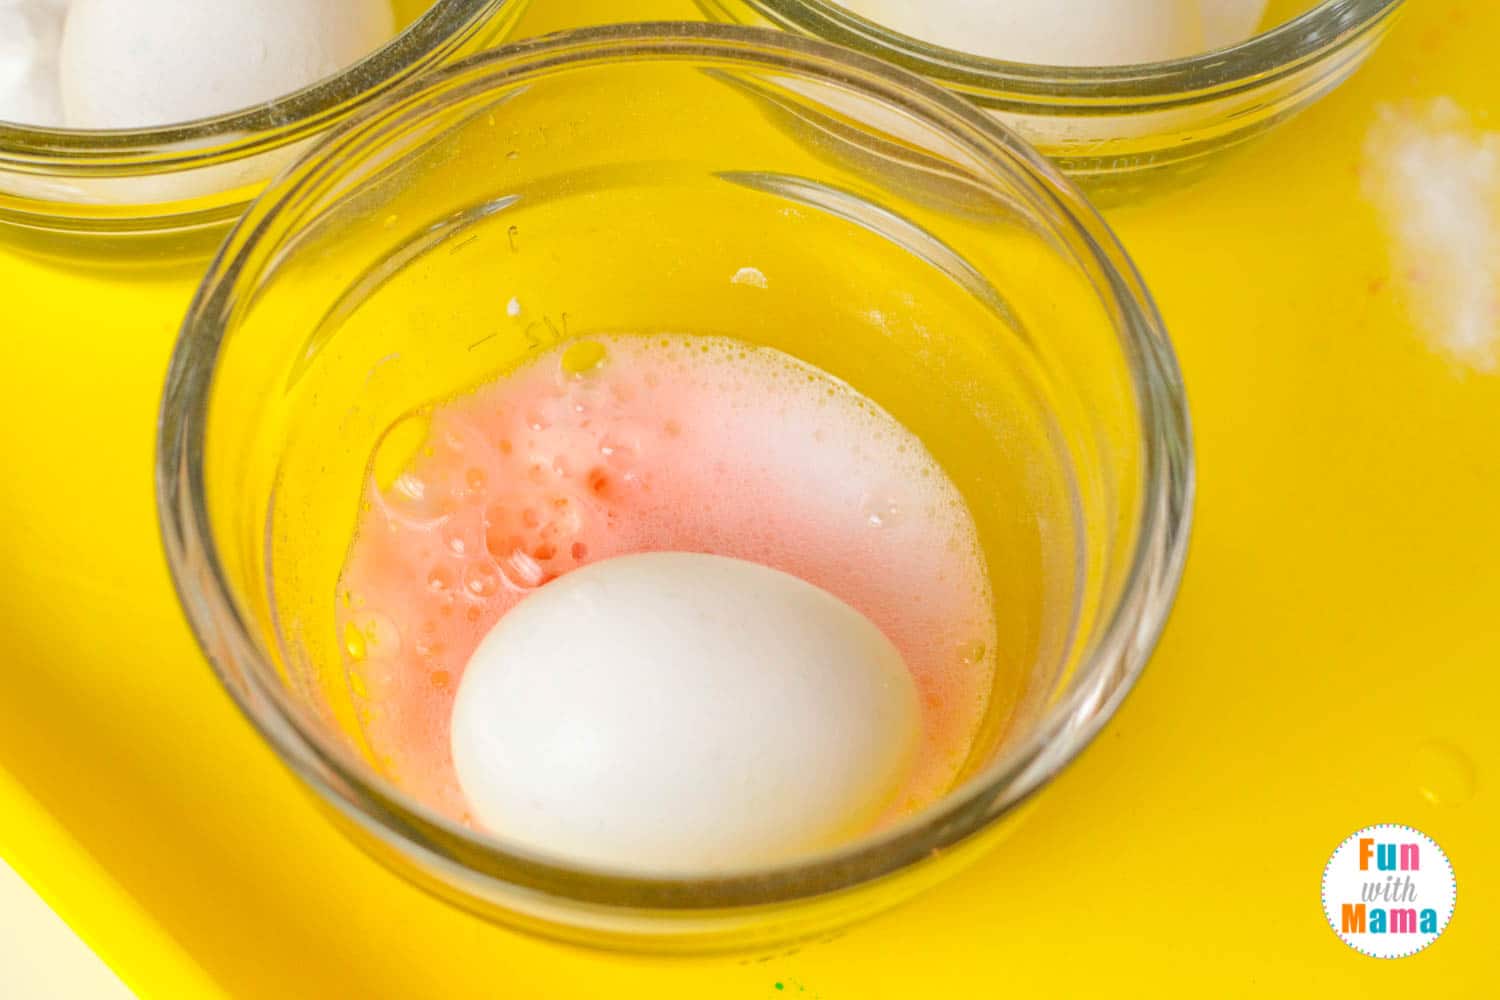 how to dye eggs with food coloring